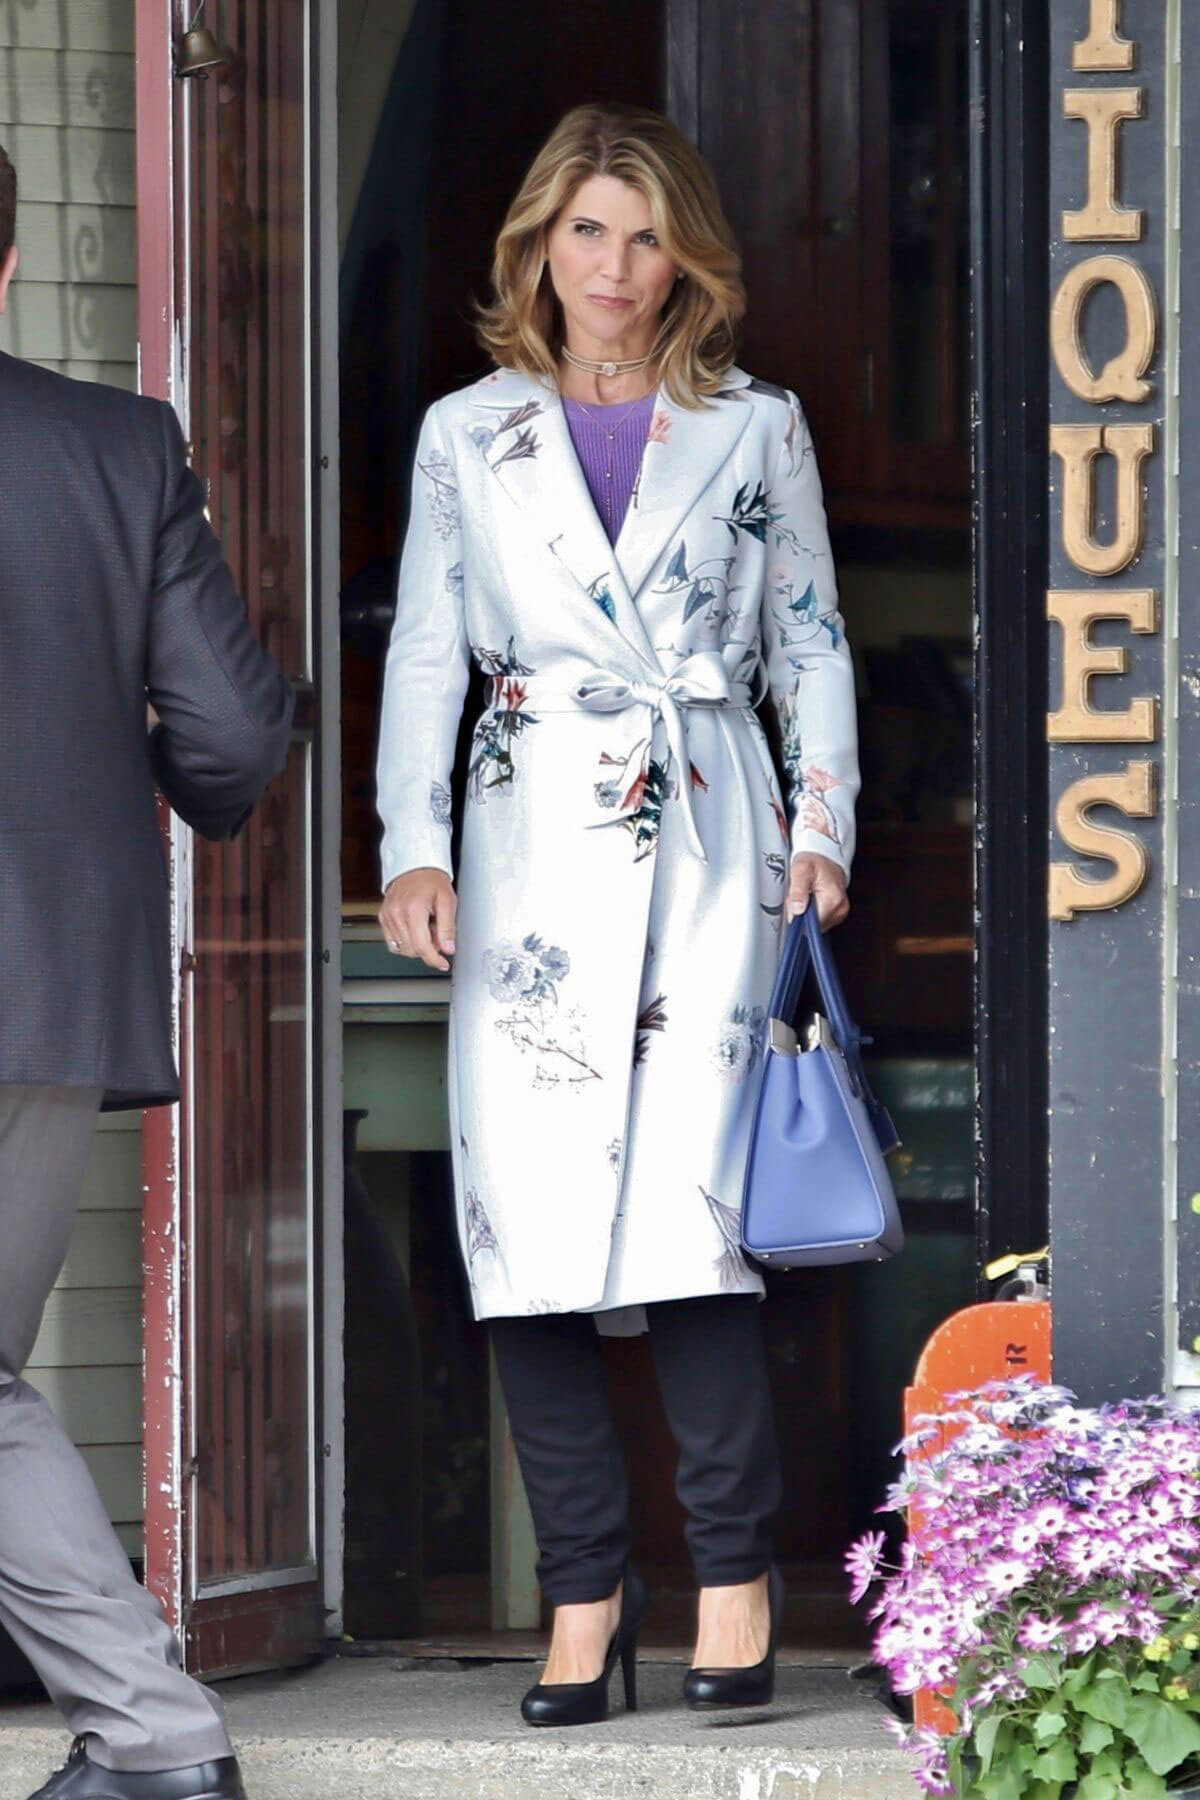 Lori Loughlin on the Set of Garage Sale Mystery in Vancouver